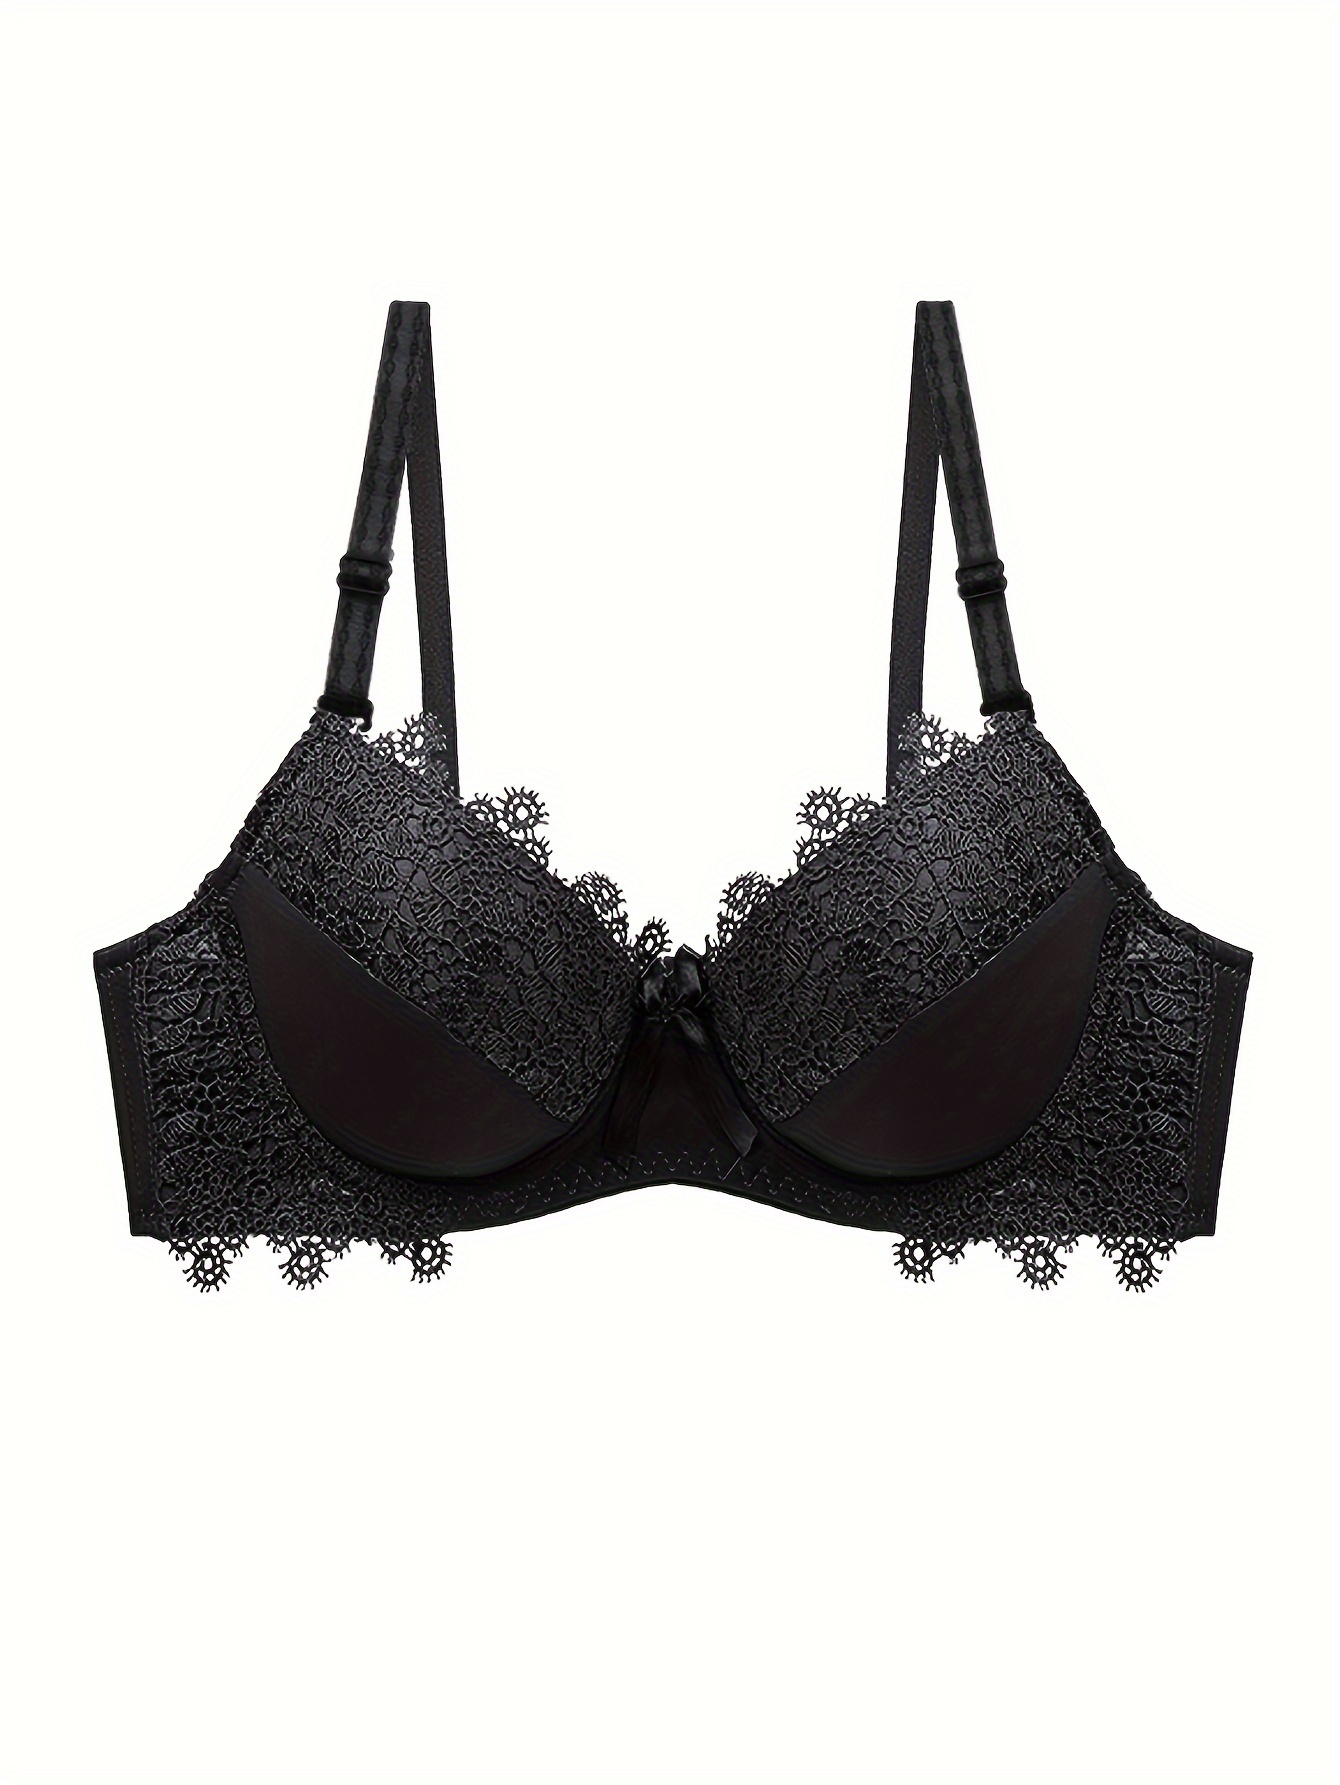  Be Wicked Women's Black and White Lace Padded Bra